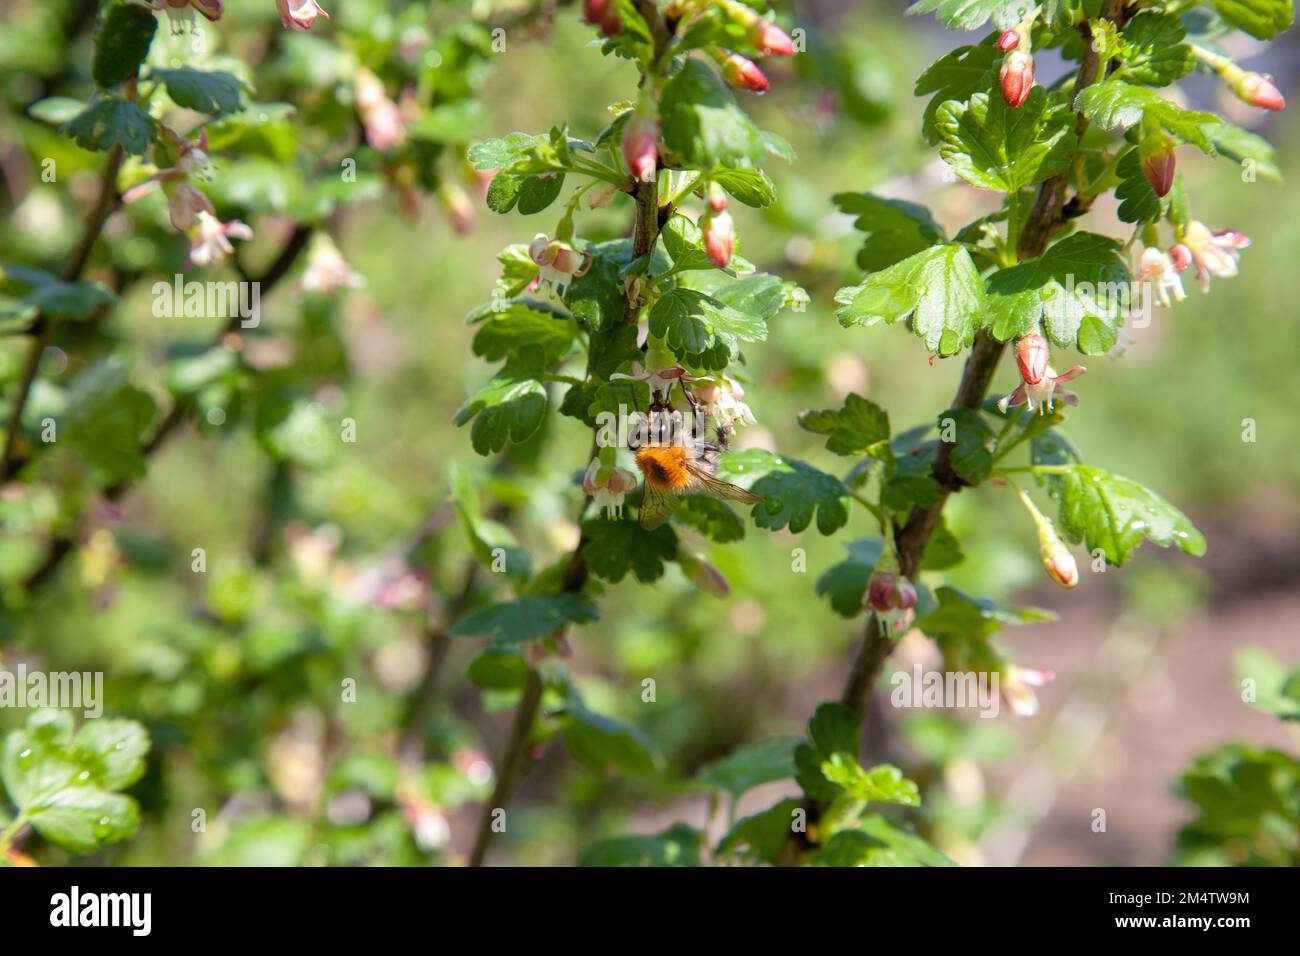 Orchard at spring time. Close up view of bumblebee on gooseberry bush flower collecting pollen and nectar. Green leaves and small pink flowers of goos Stock Photo